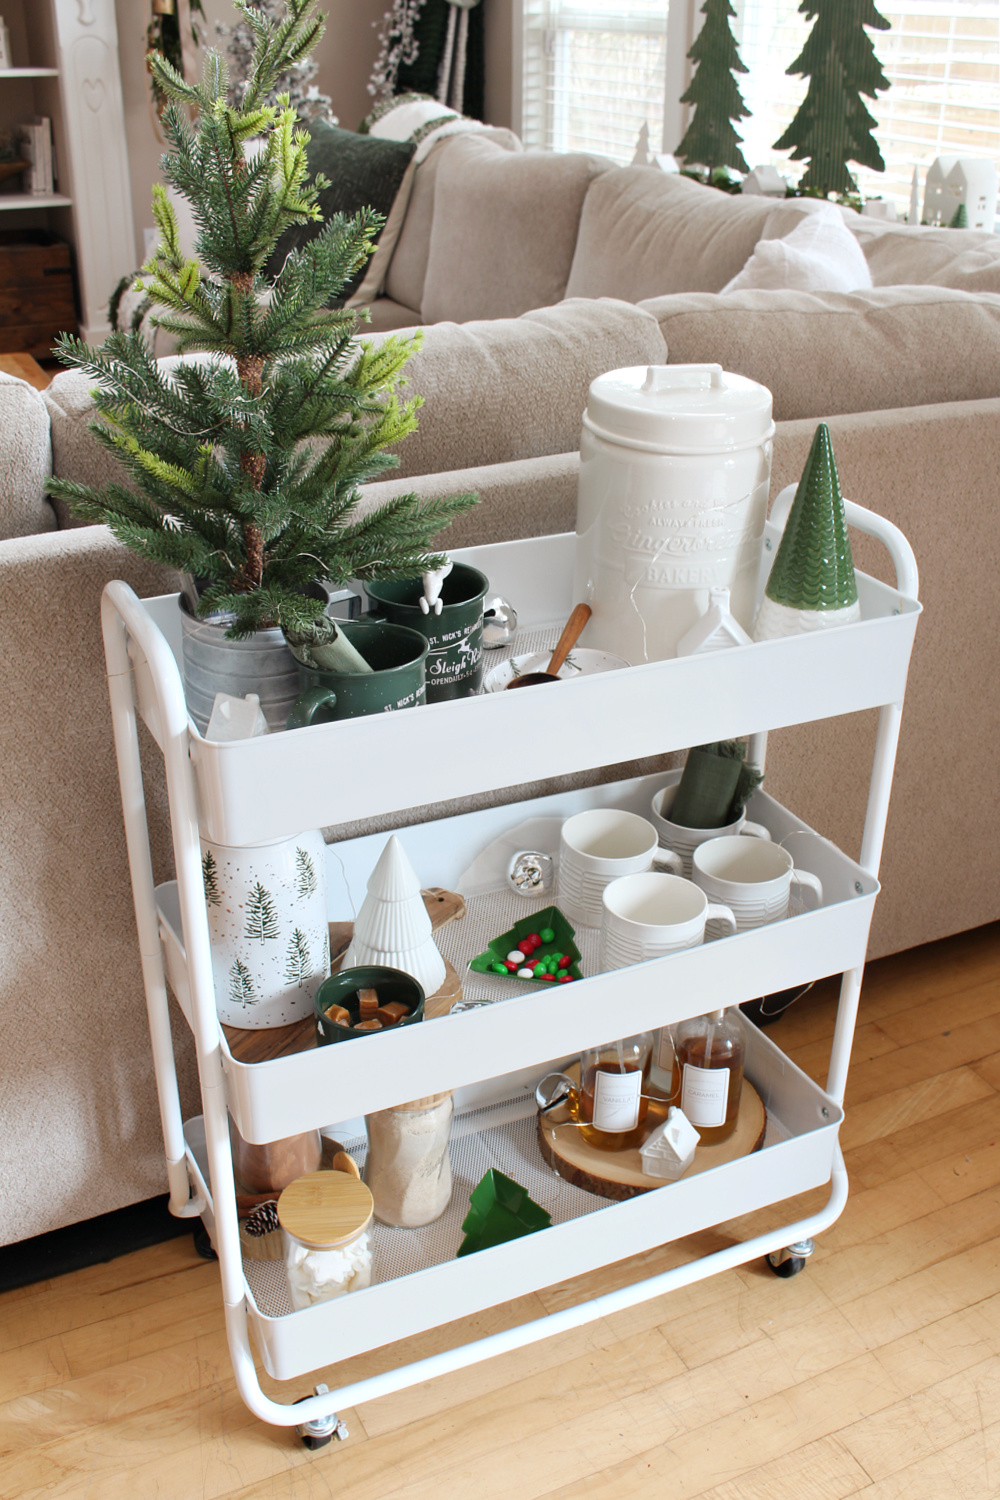 Hot chocolate bar cart decorated in green and white.